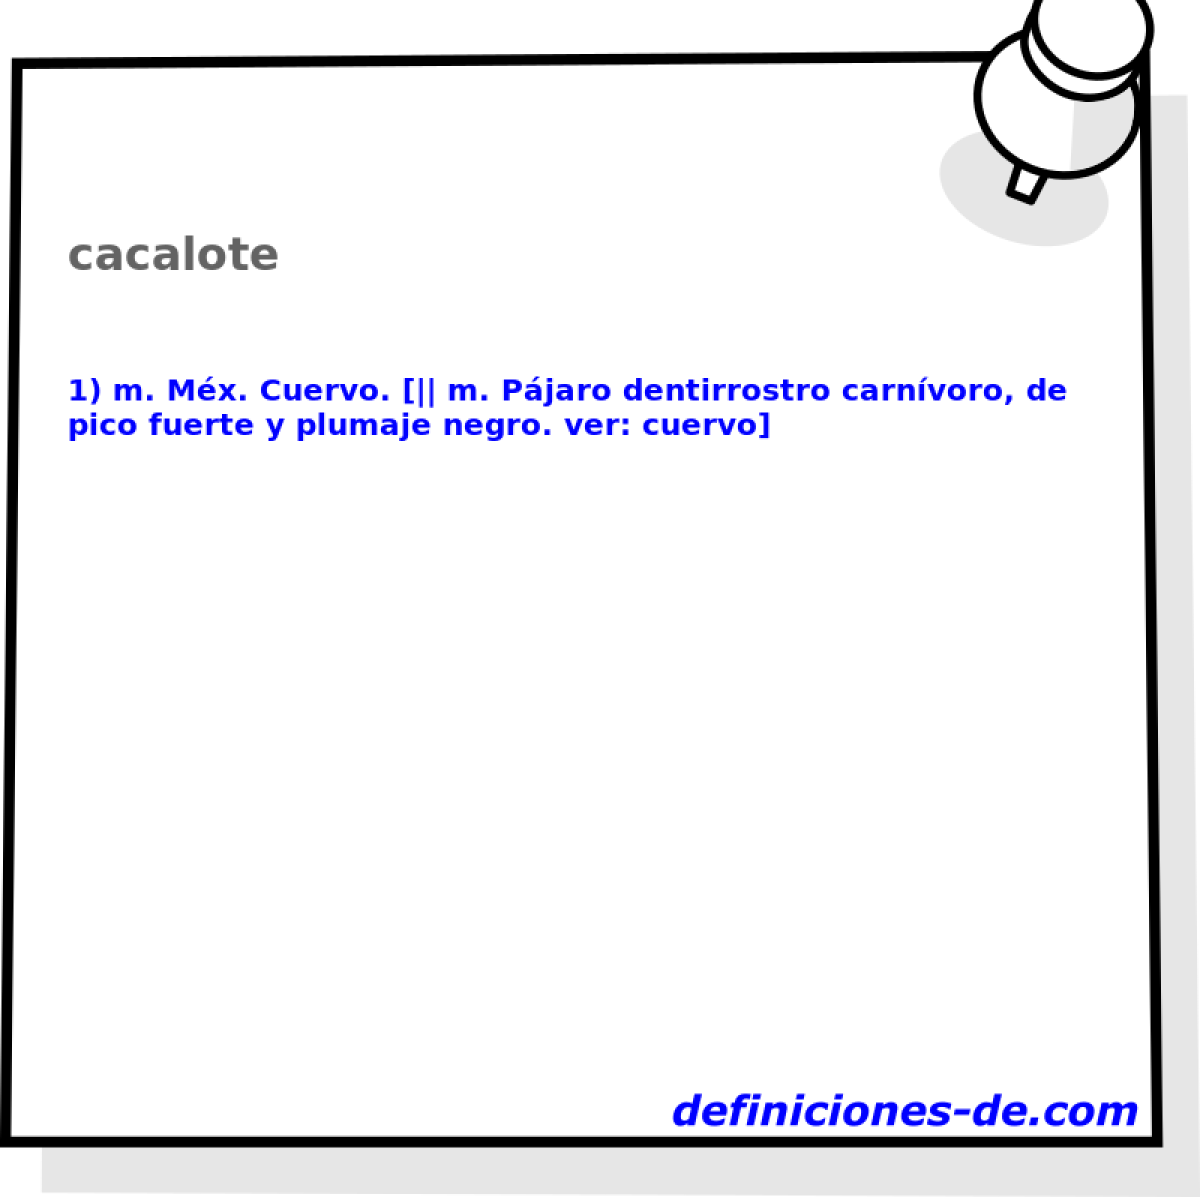 cacalote 